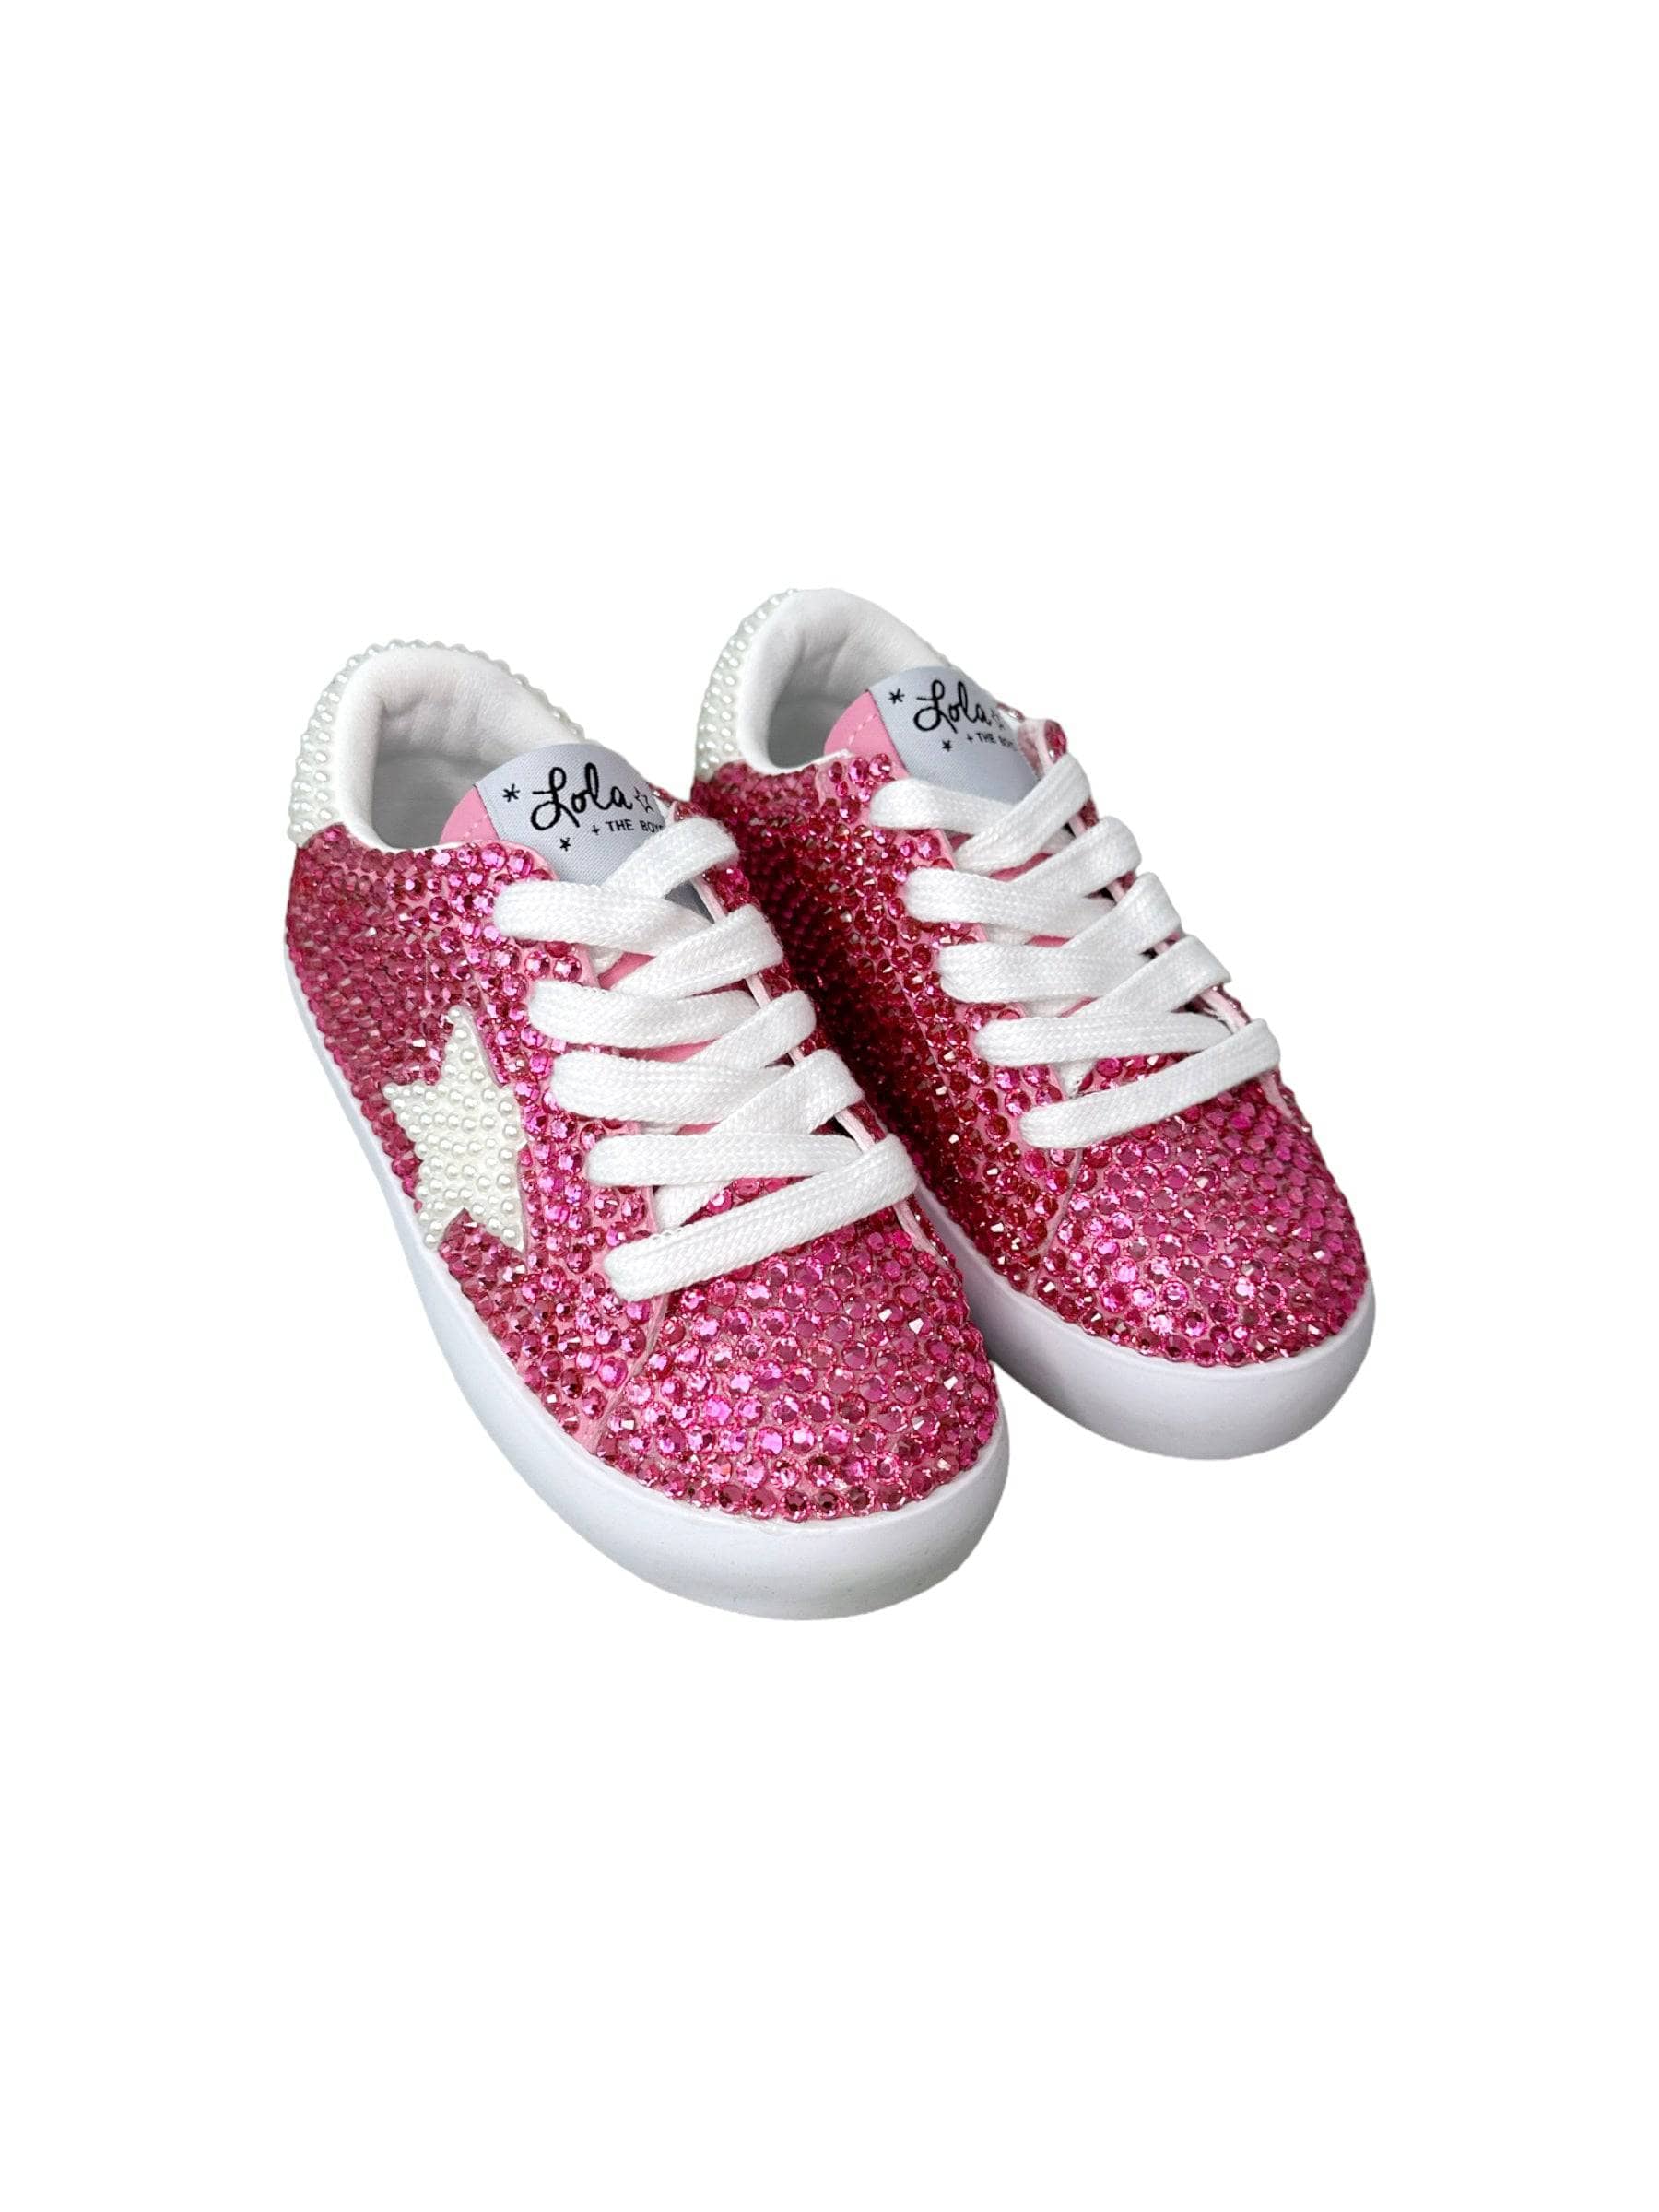 Diamonds and Pearls Sparkle Sneakers, 11C (28)